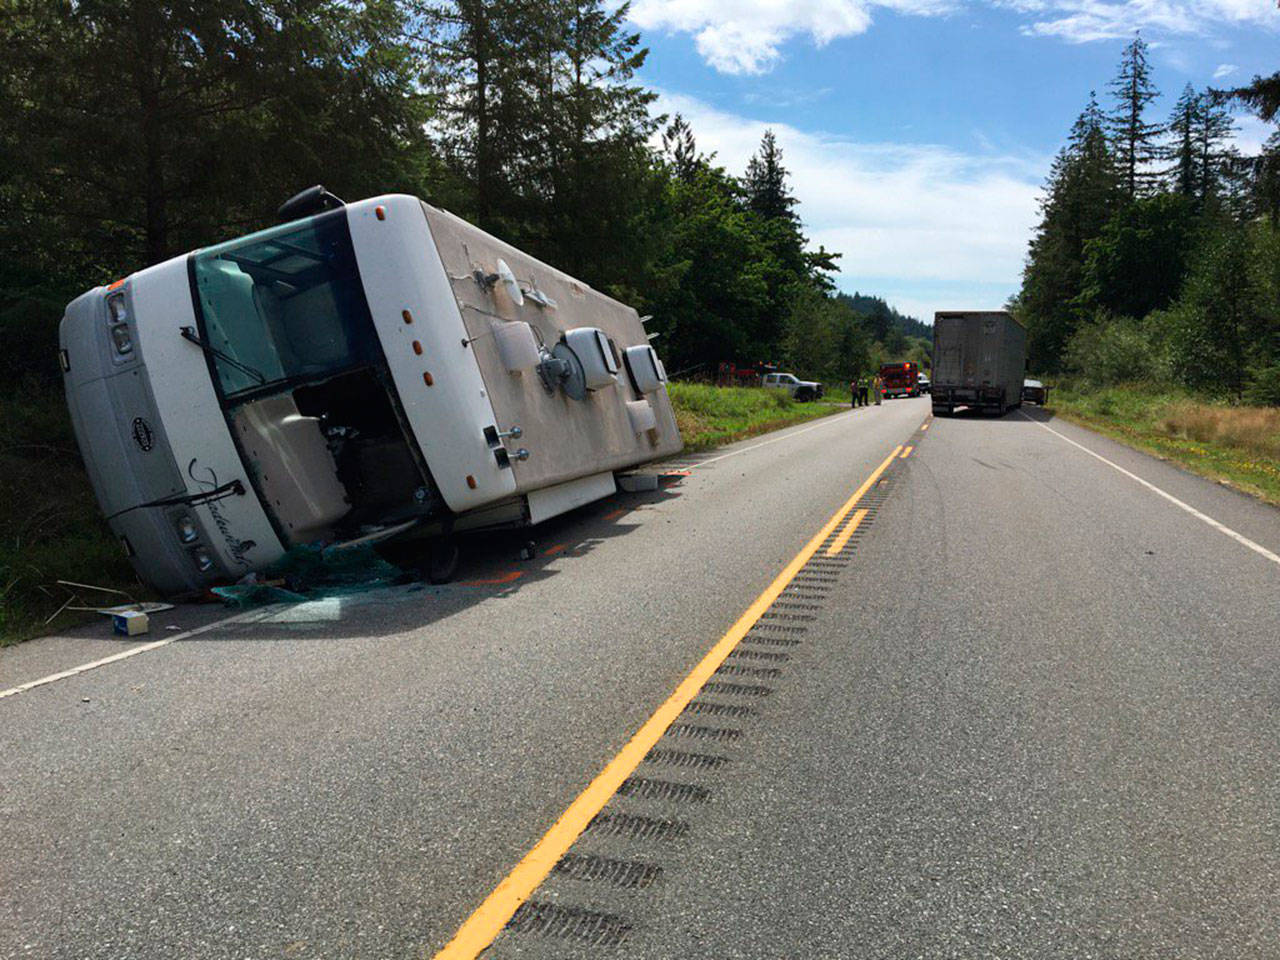 A woman was airlifted to Harborview Medical Center after a three-vehicle wreck on U.S. Highway 101 near Quilcene on Tuesday. (Washington State Patrol)